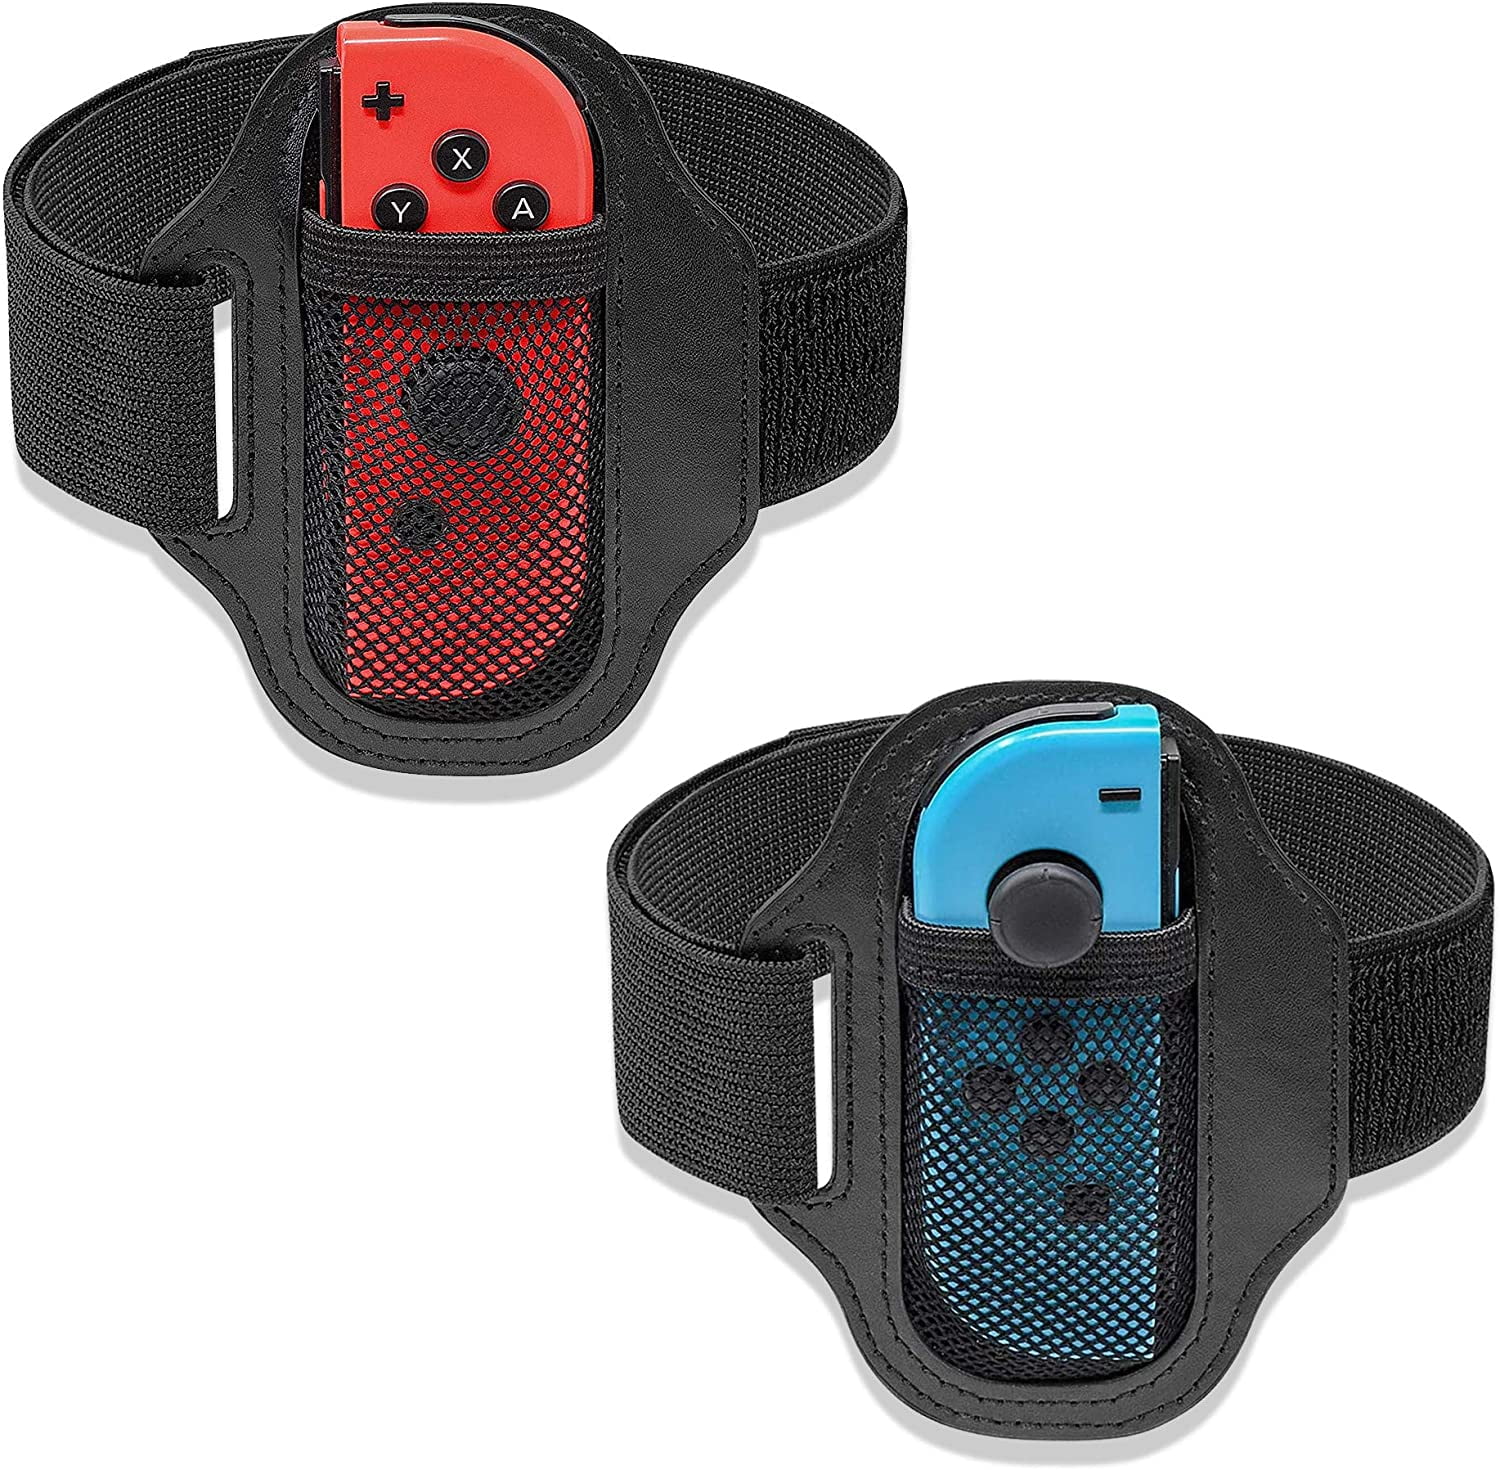 Leg Strap for Nintendo Switch Ring Fit Adventure and Nintendo Switch Sports - 1 Pack